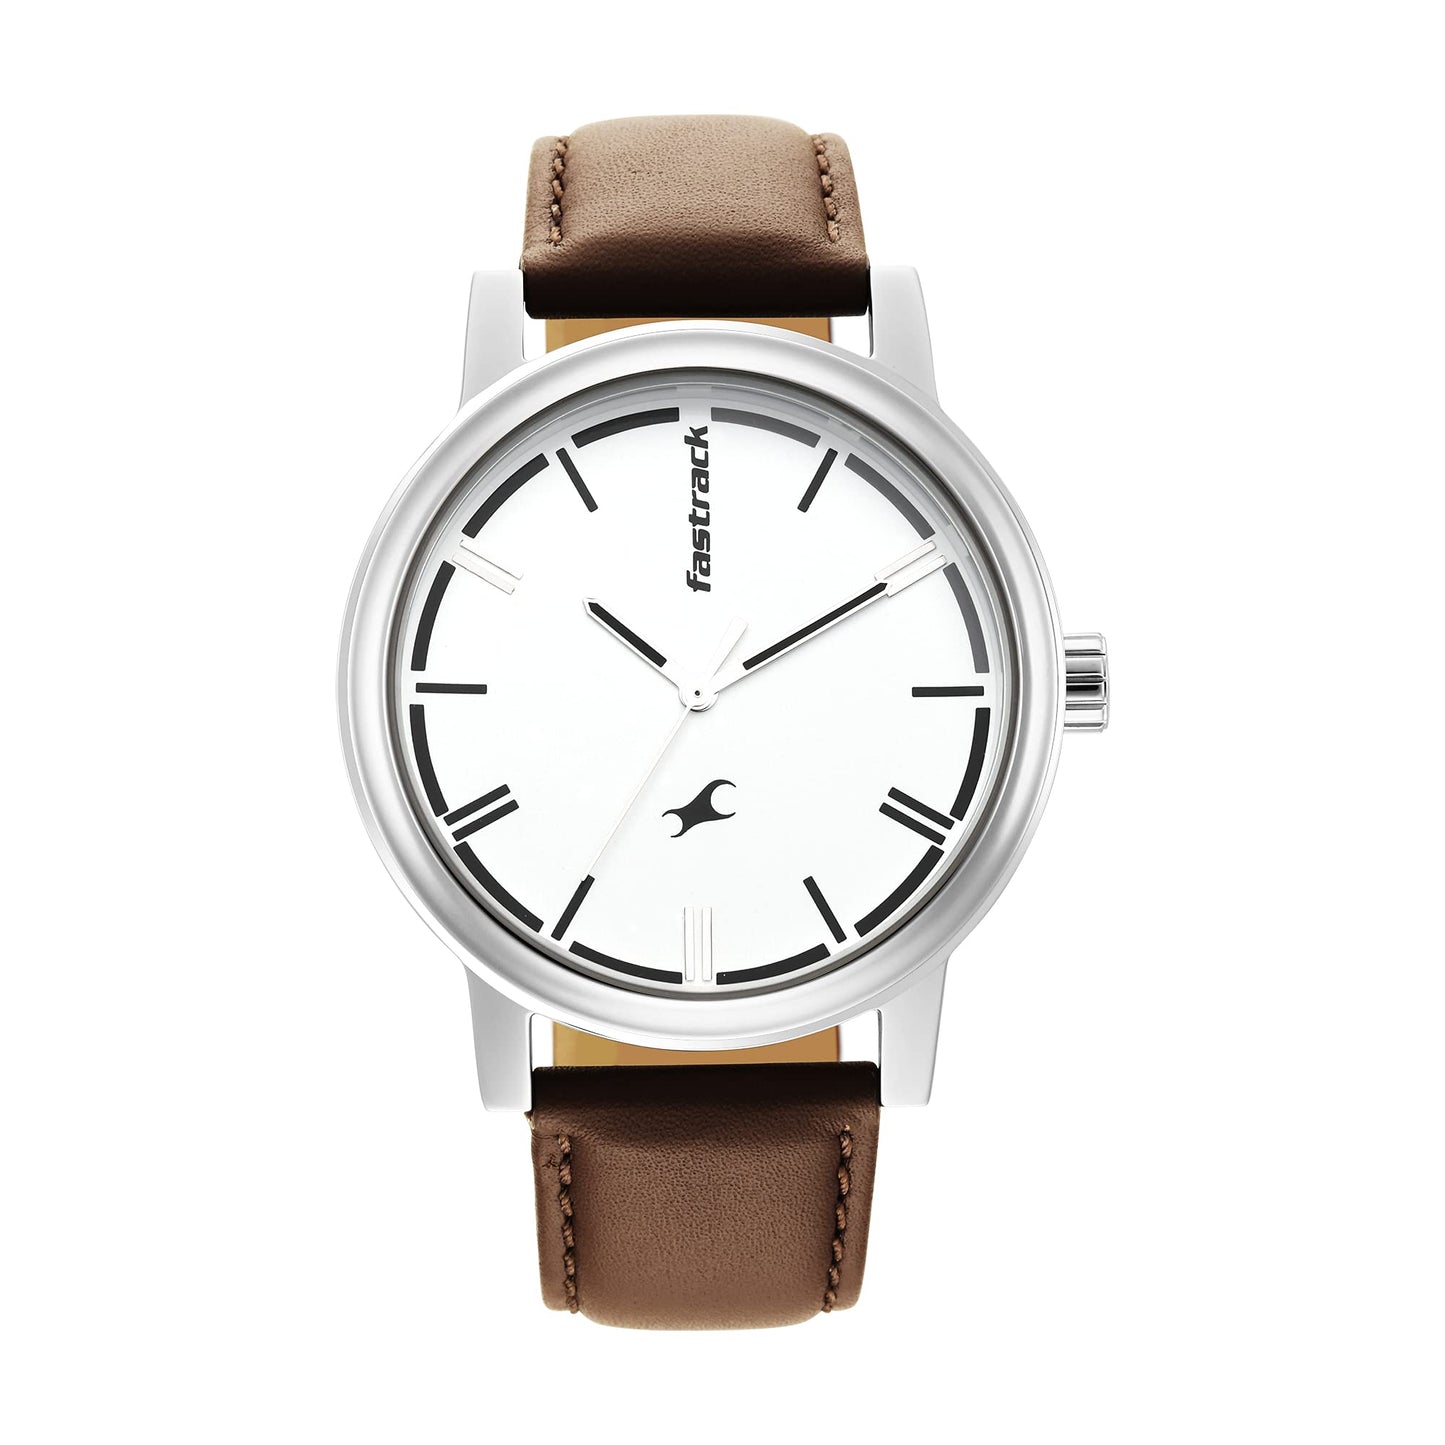 Fastrack Men Leather White Dial Analog Watch -3261Sl01, Band Color-Brown